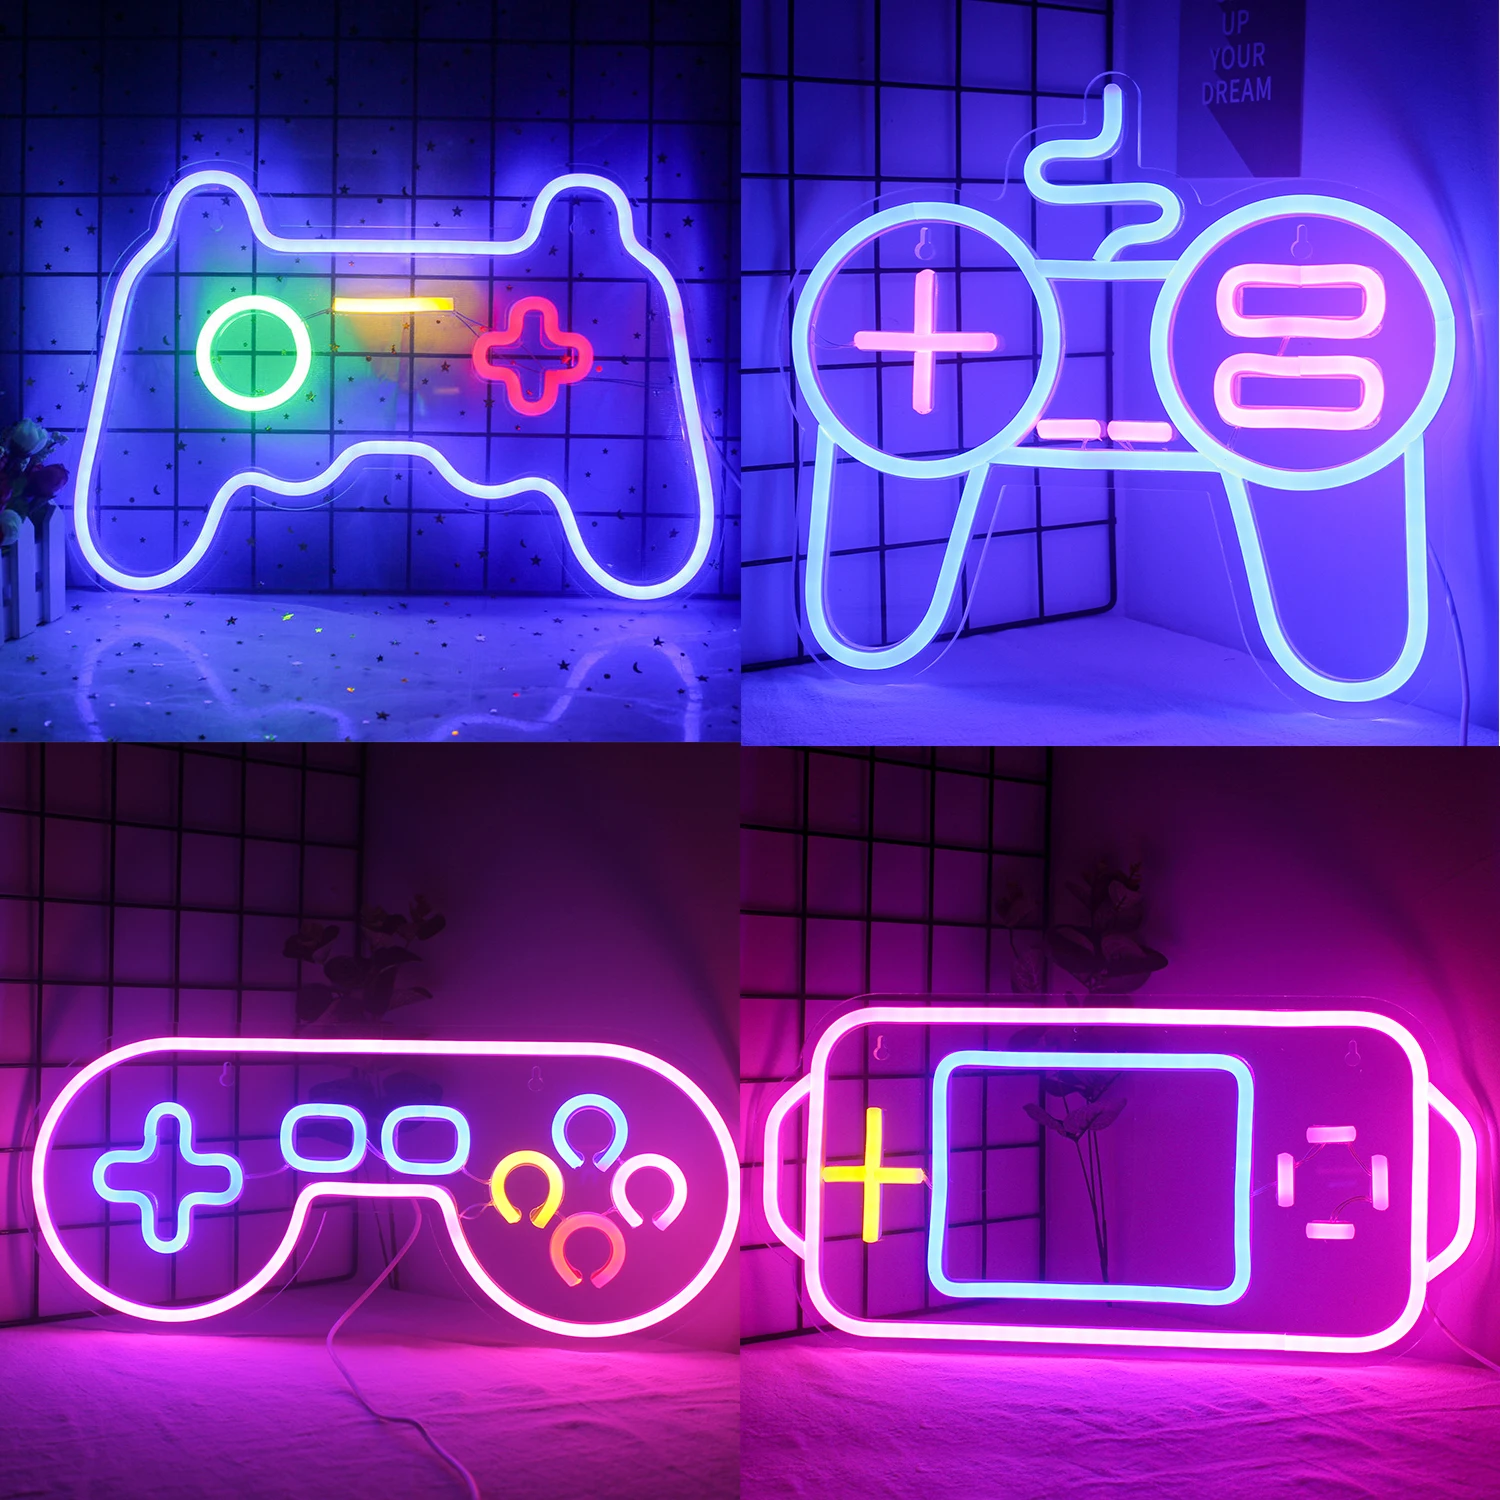 

Ineonlife Neon LED Neon Sign Light Gamepad Neon Light Shaped Lamp For Game Room Decor Xmas Party Bar Wedding Home DecorationGift